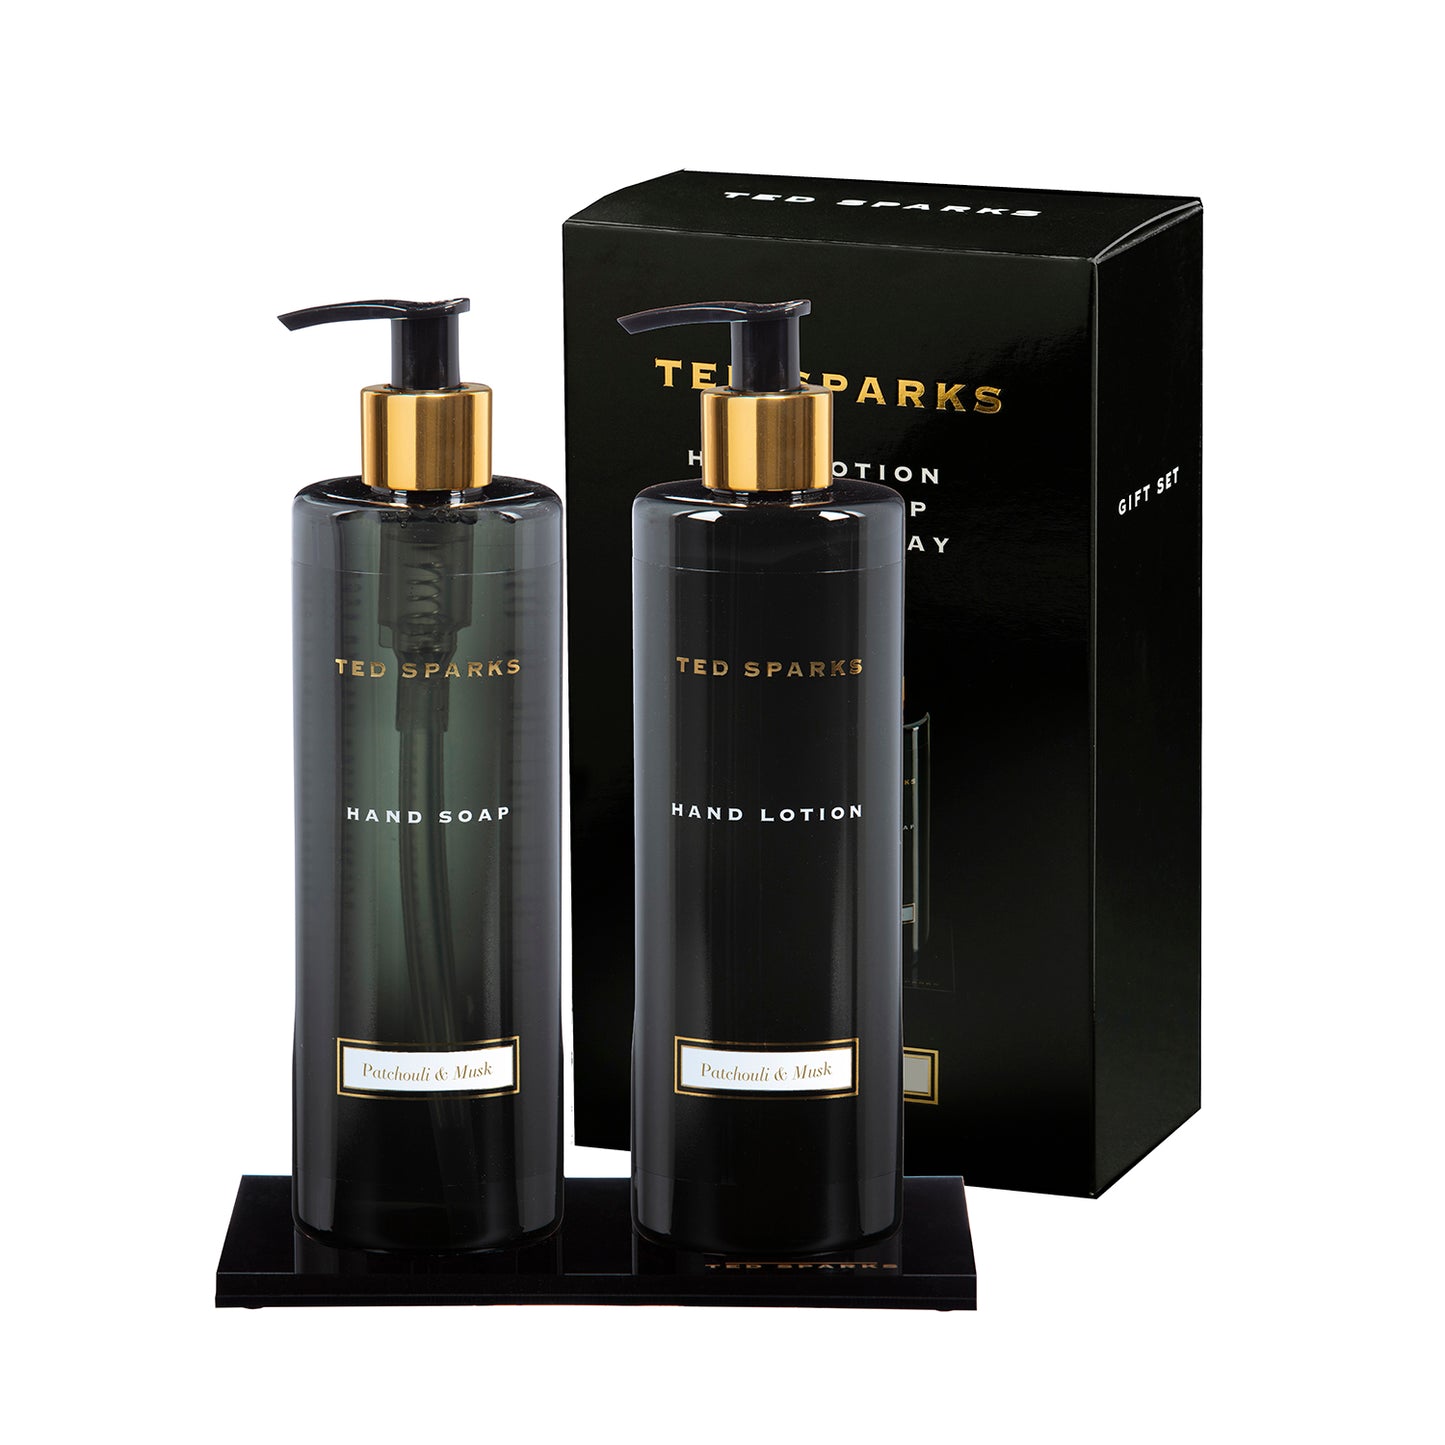 TED SPARKS - Hand Gift Set - Patchouli & Musk 